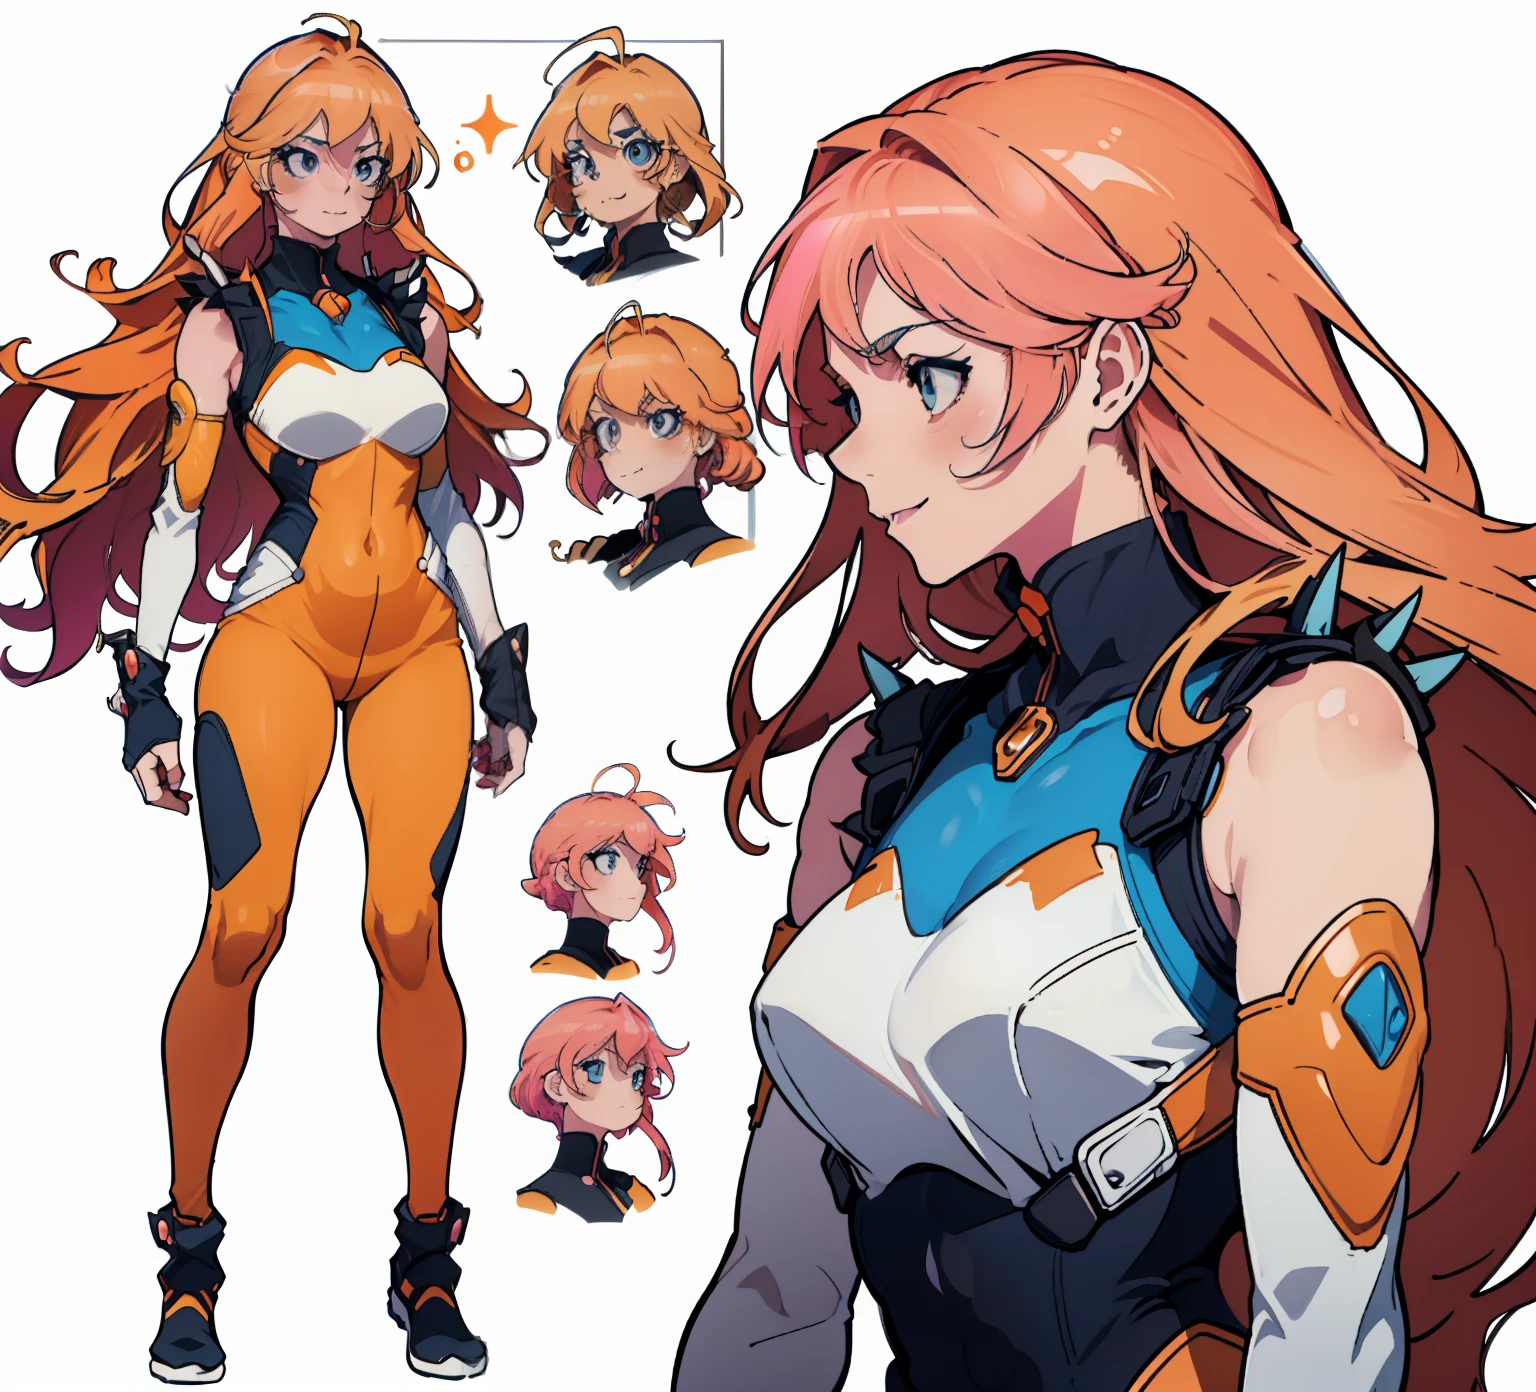 ((Best Quality)), ((Masterpiece)), ((Realistic)) tsuka kendou, 1woman, cute face, determined look, smile, long legs, full body, adult mature female (spiky orange-pink hair, (orange-pink mullet 1.1)), (very long hair), blue eyes, (white/yellow pupil,) hero, sleeveless blue spandex bodysuit, long orange-pink rabbit ears, desert oasis, tbcc illustration (((detailed character sheet, frontal view, side view, three quarter view))) (((white background))) 8 and a half heads full body